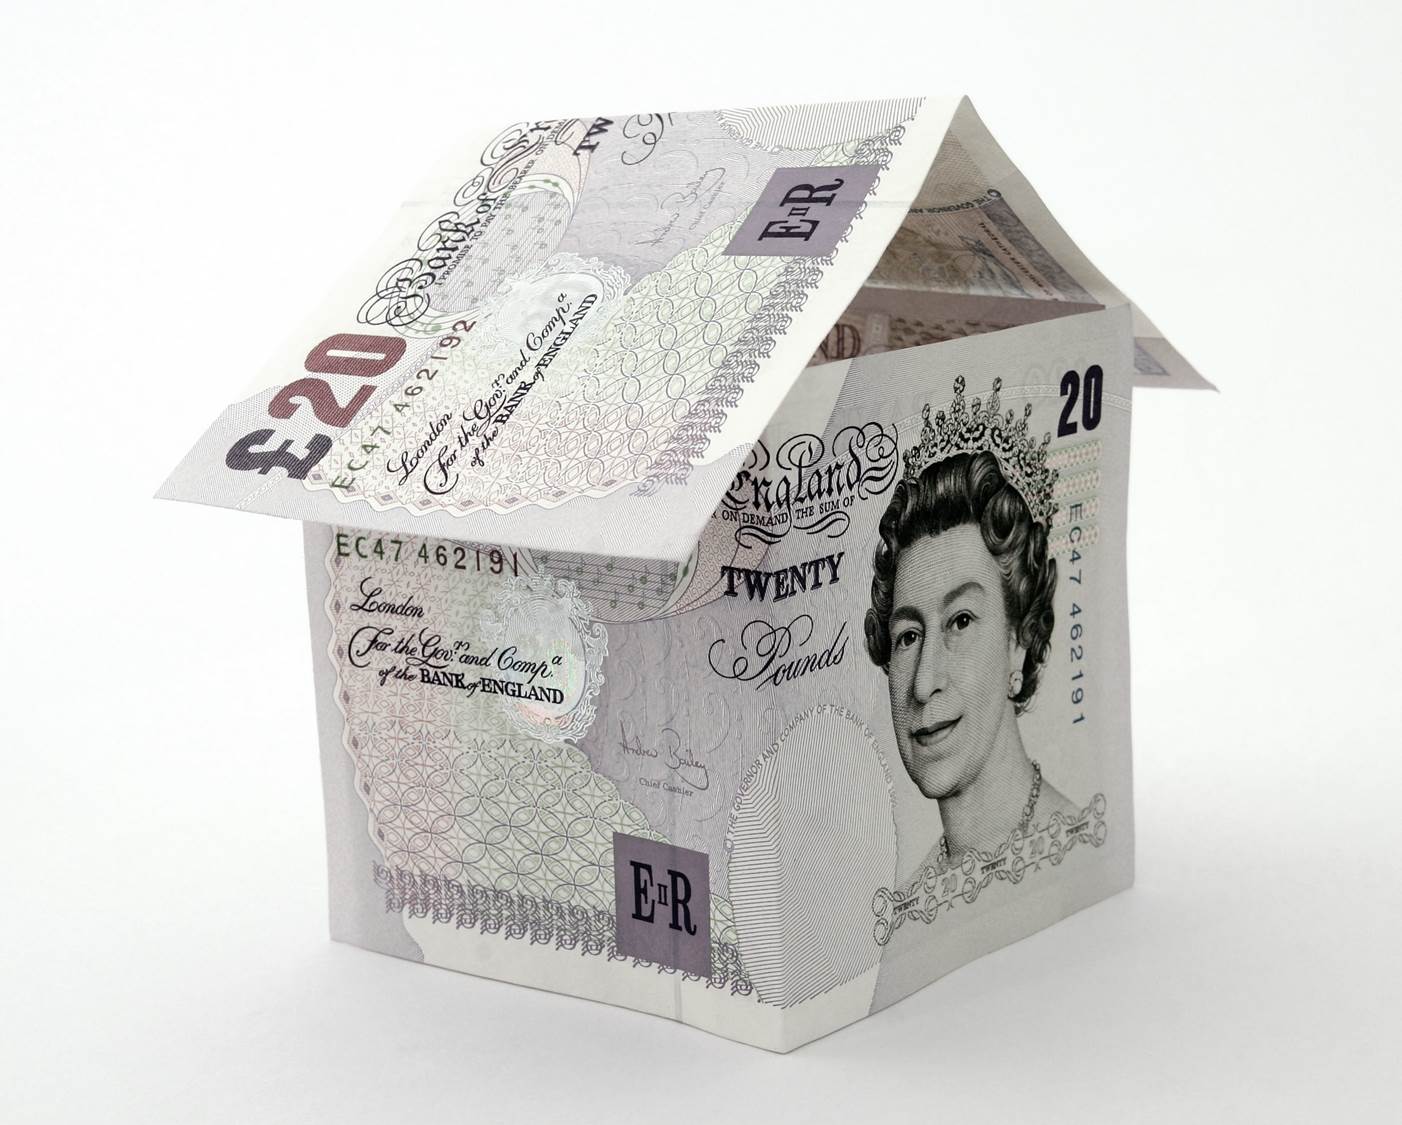 £20 in the shape of a house